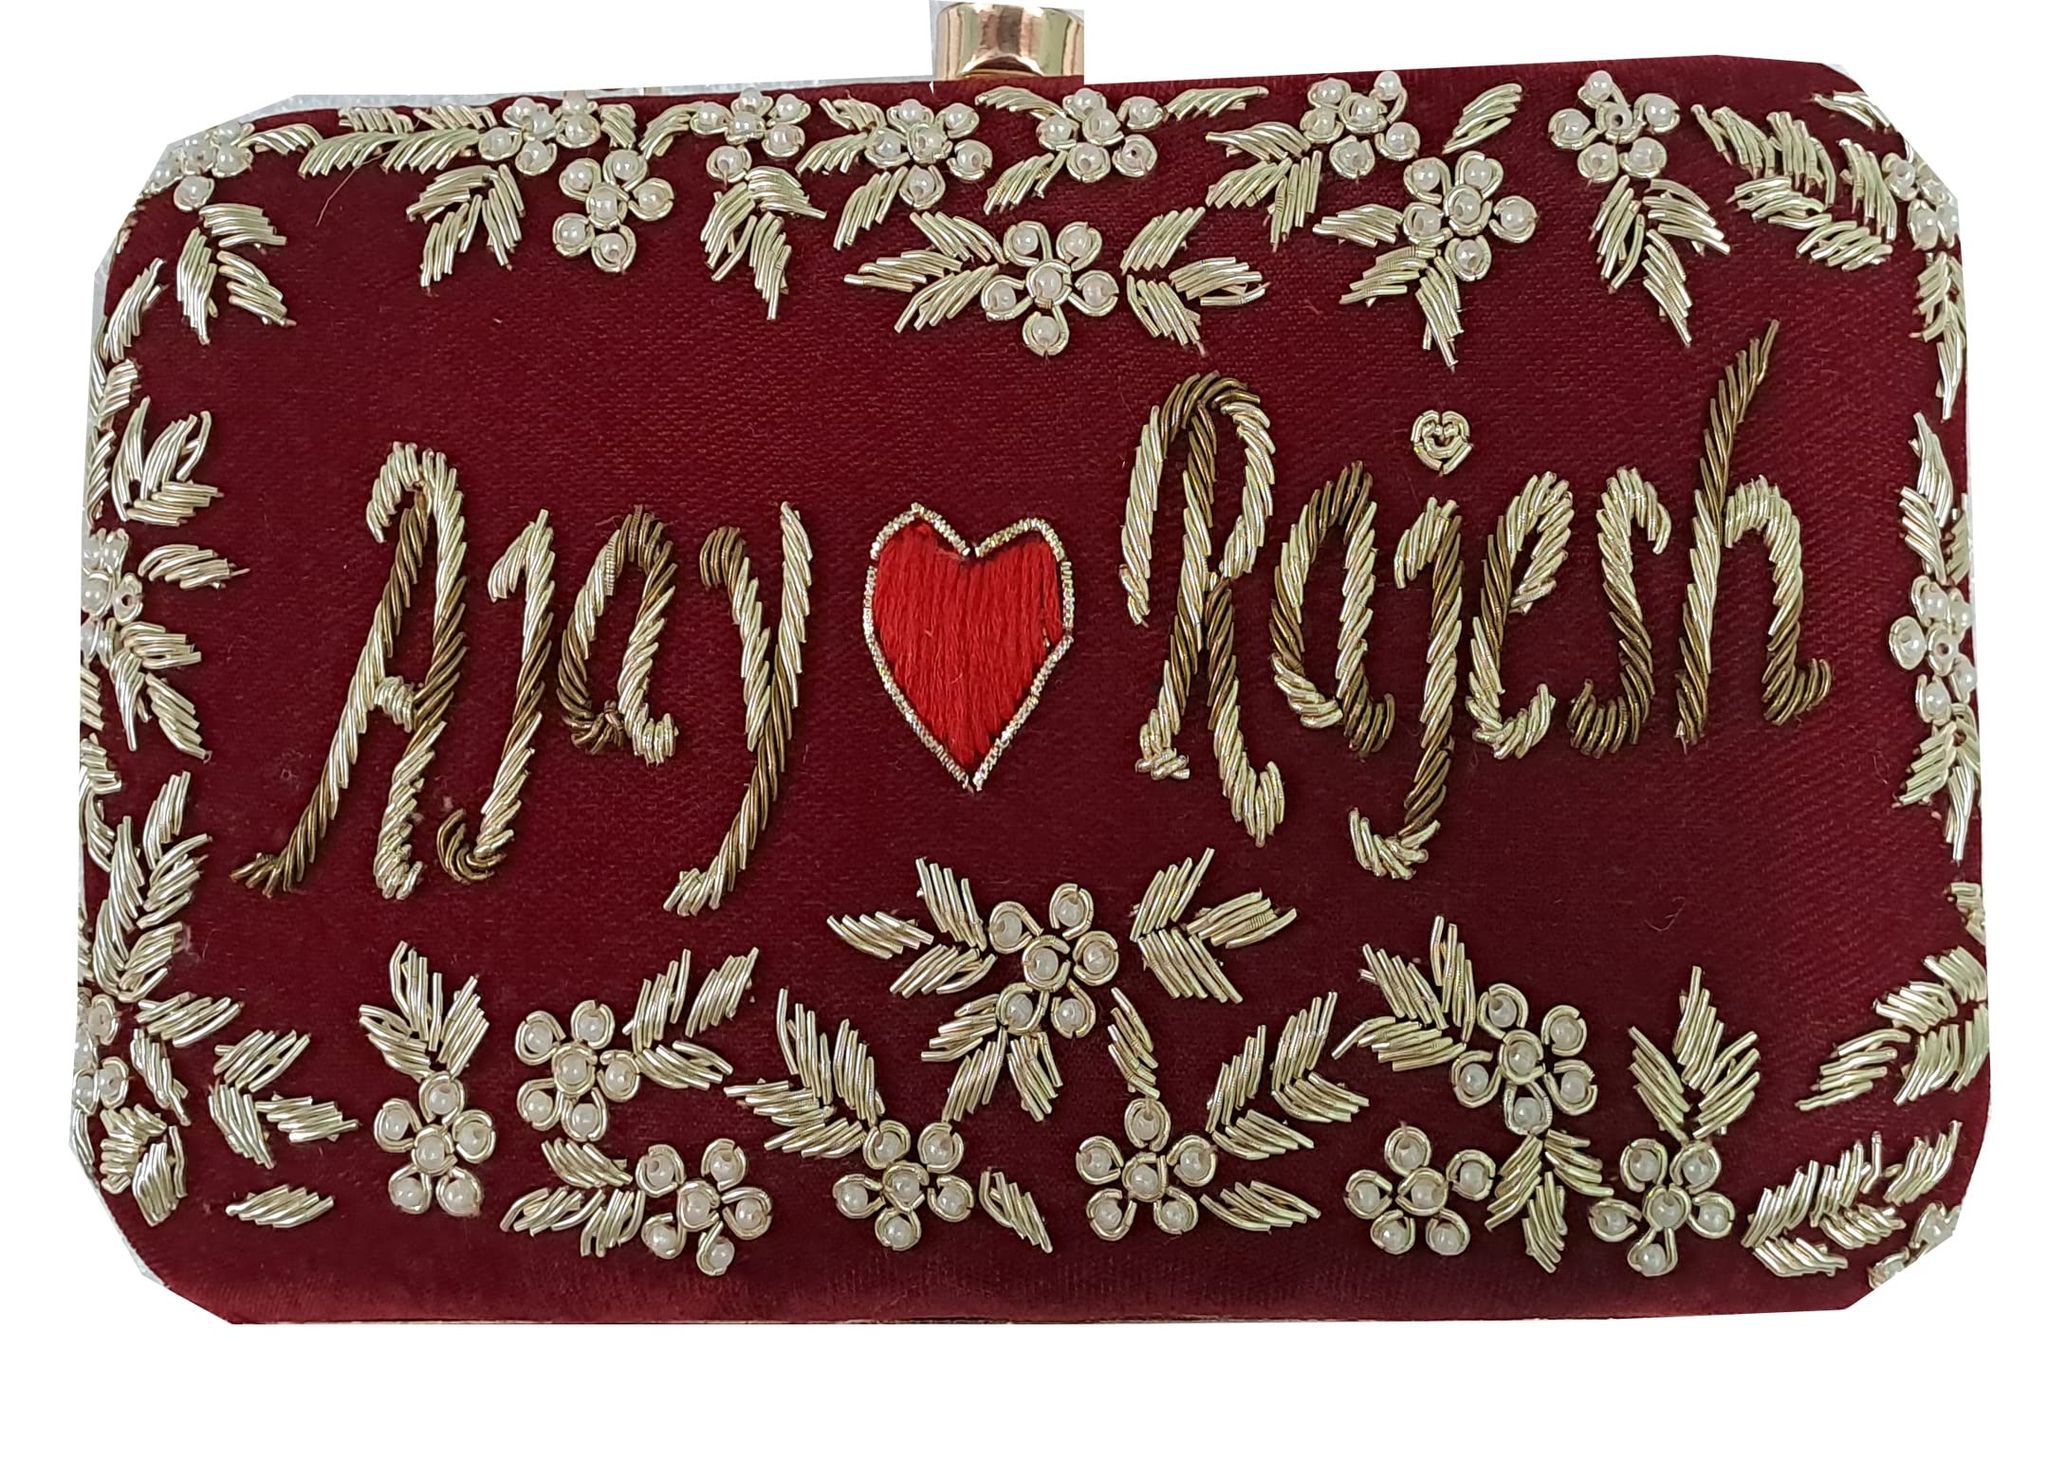 summer new personalized clutch bag small| Alibaba.com